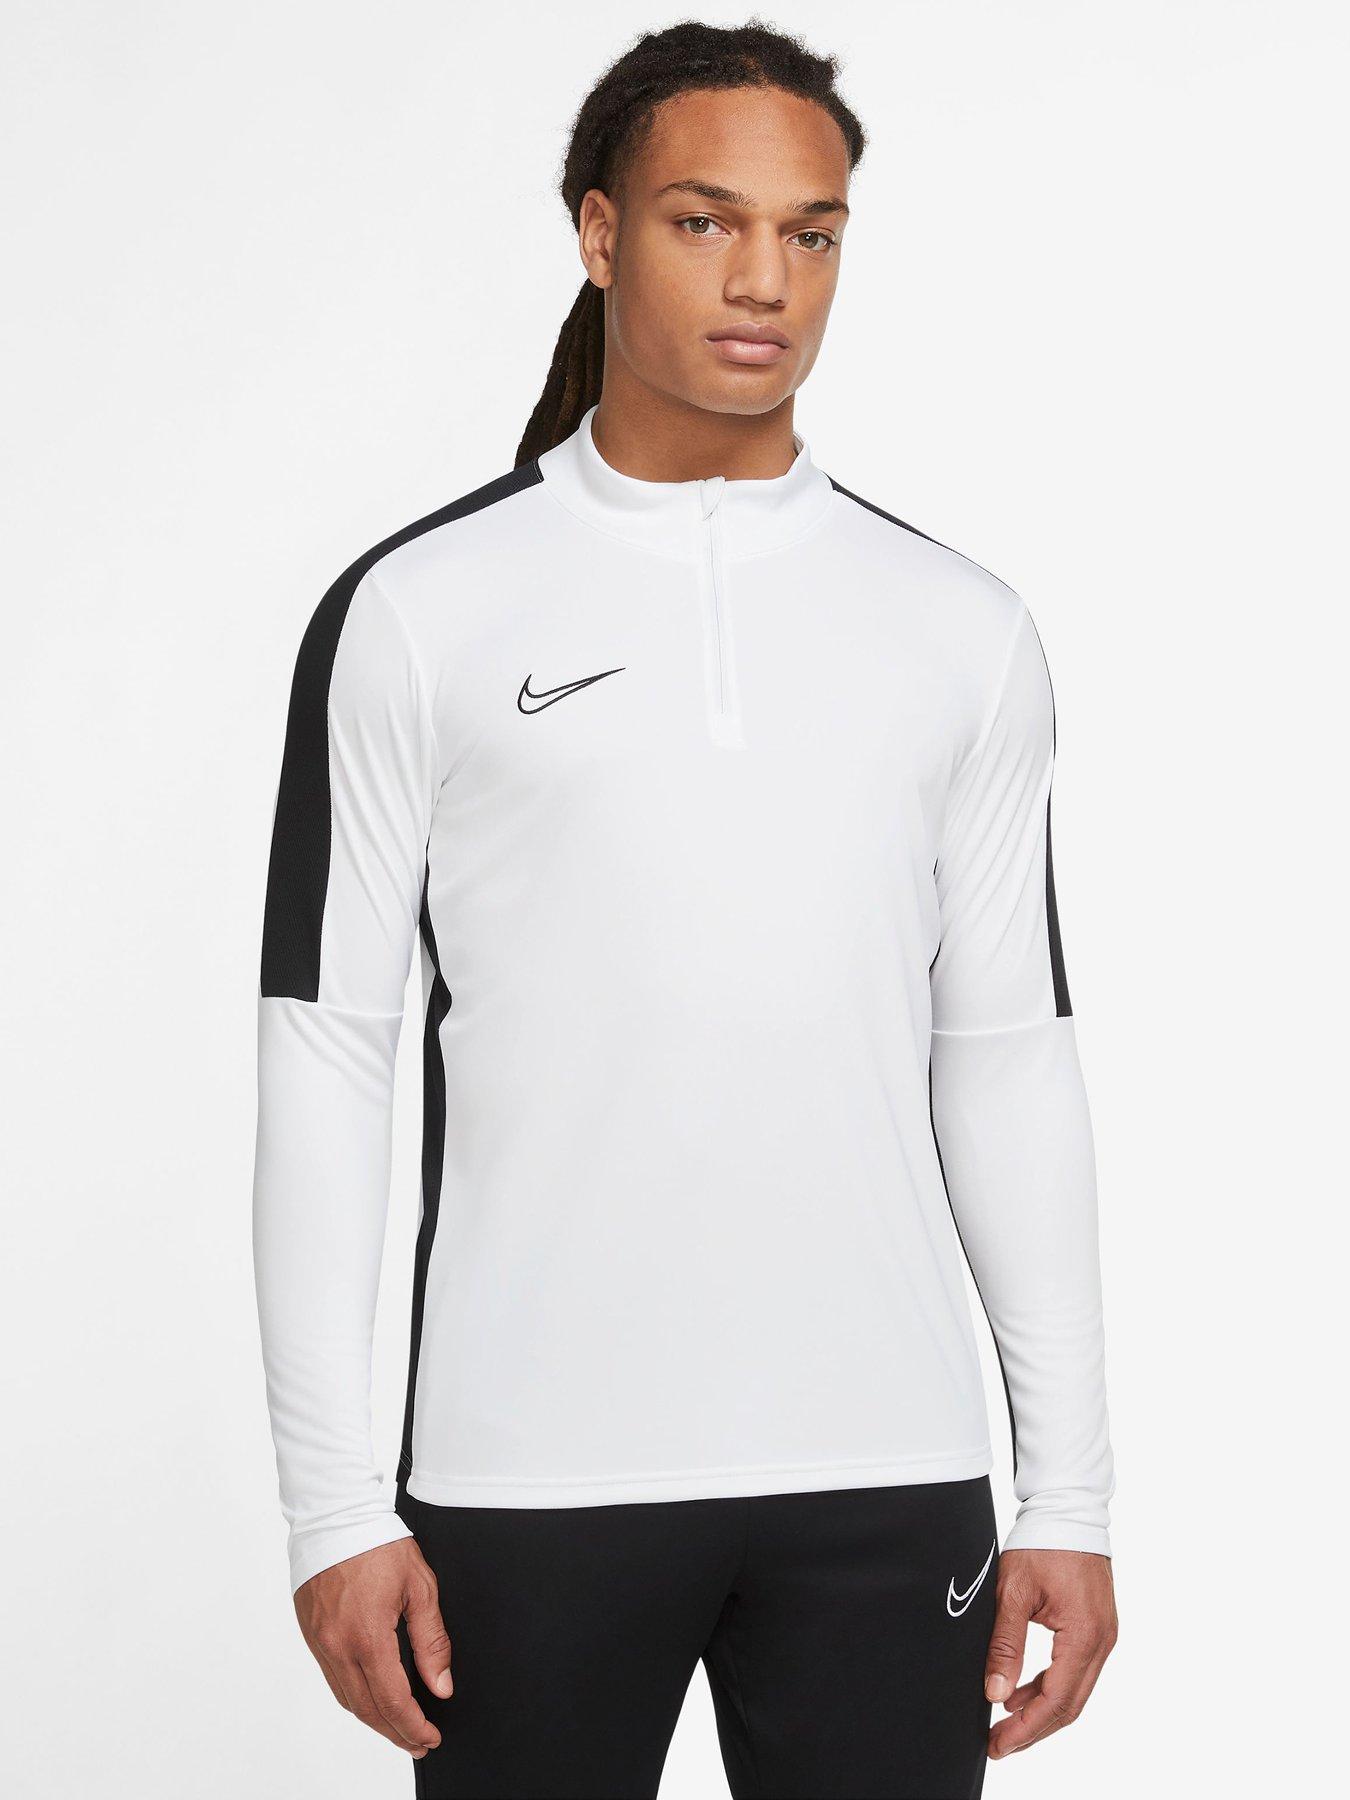 Nike Men's Dry Knit Academy 23 Drill Top - WHITE/BLACK | littlewoods.com